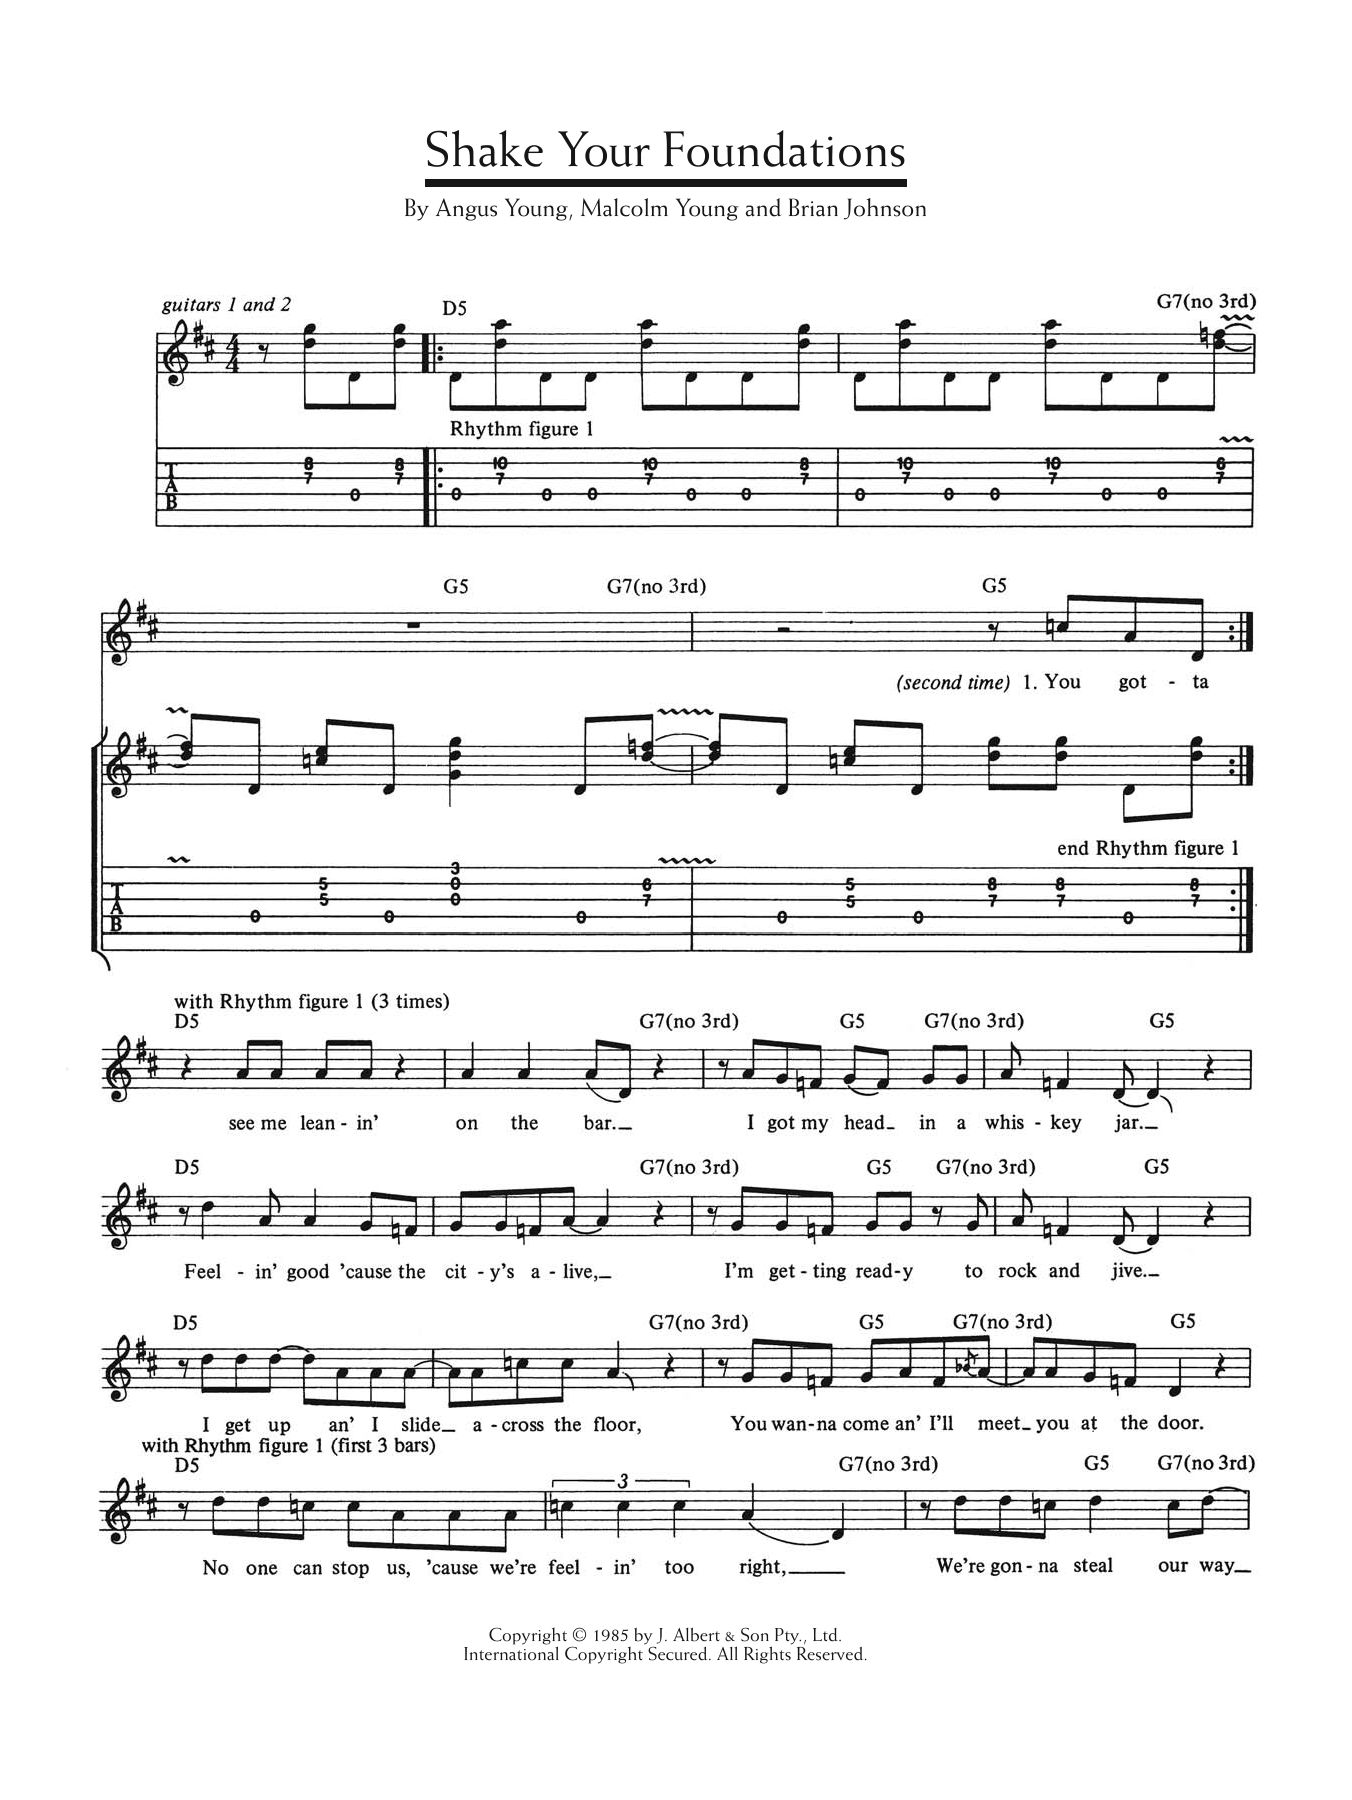 Download AC/DC Shake Your Foundations Sheet Music